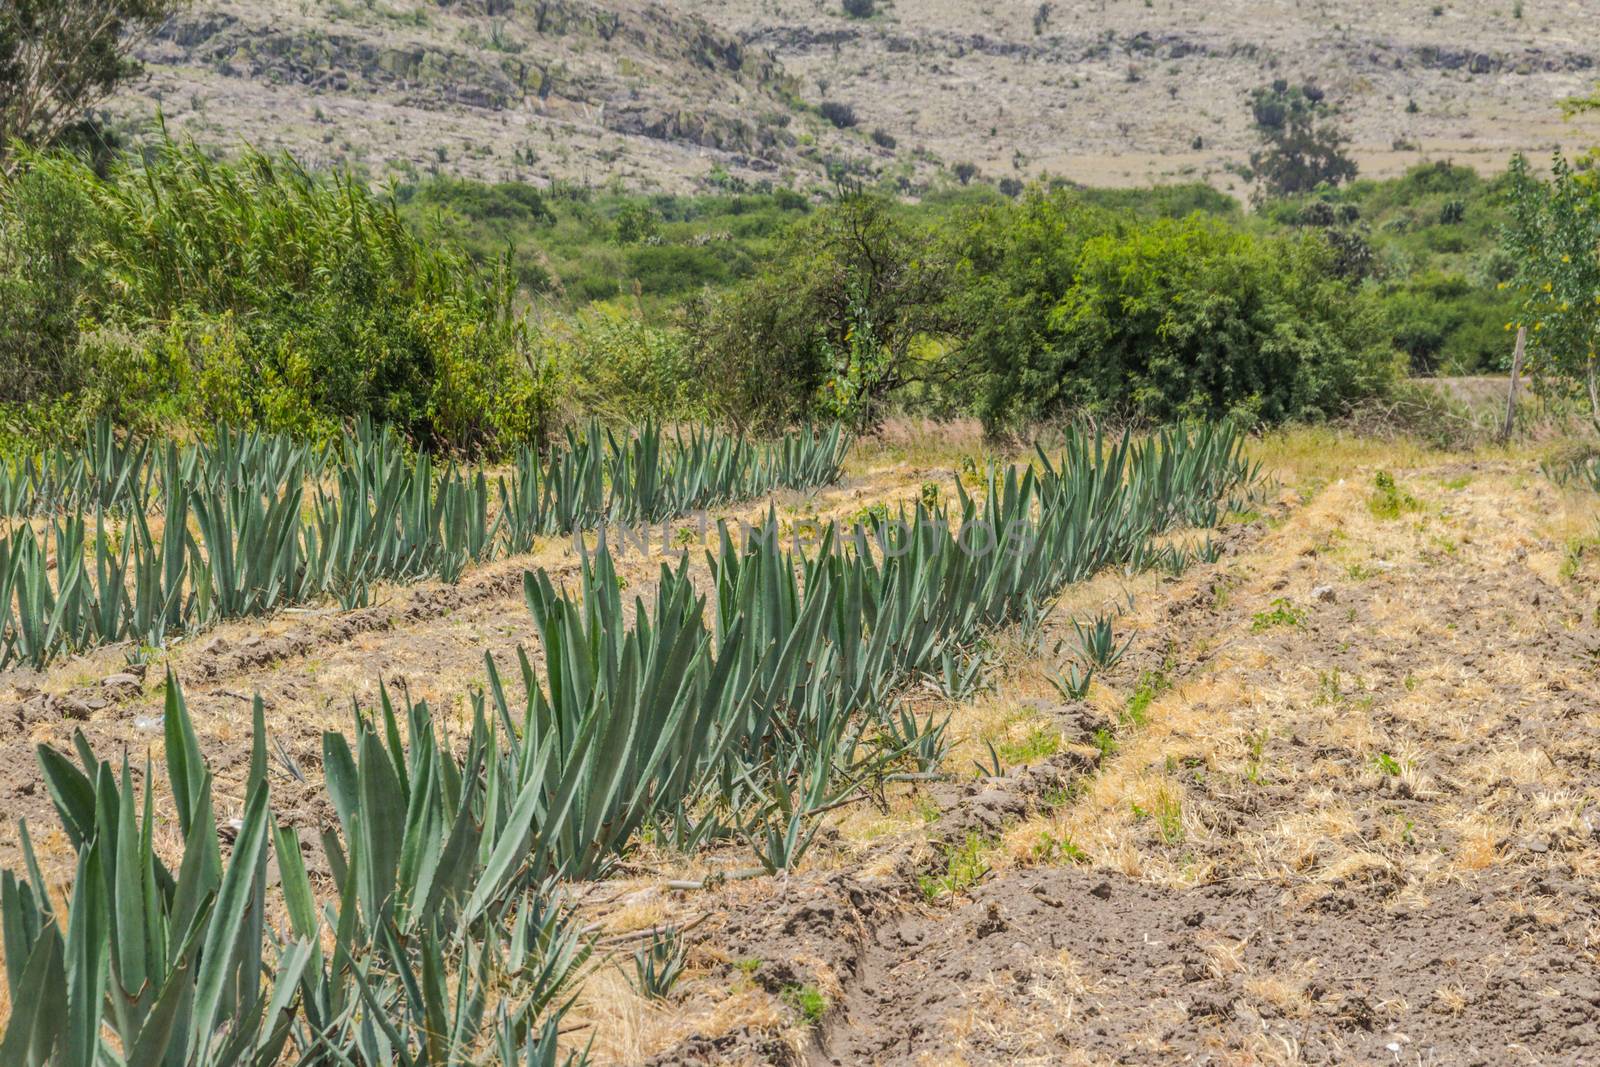 Photograph of a field with agave plants